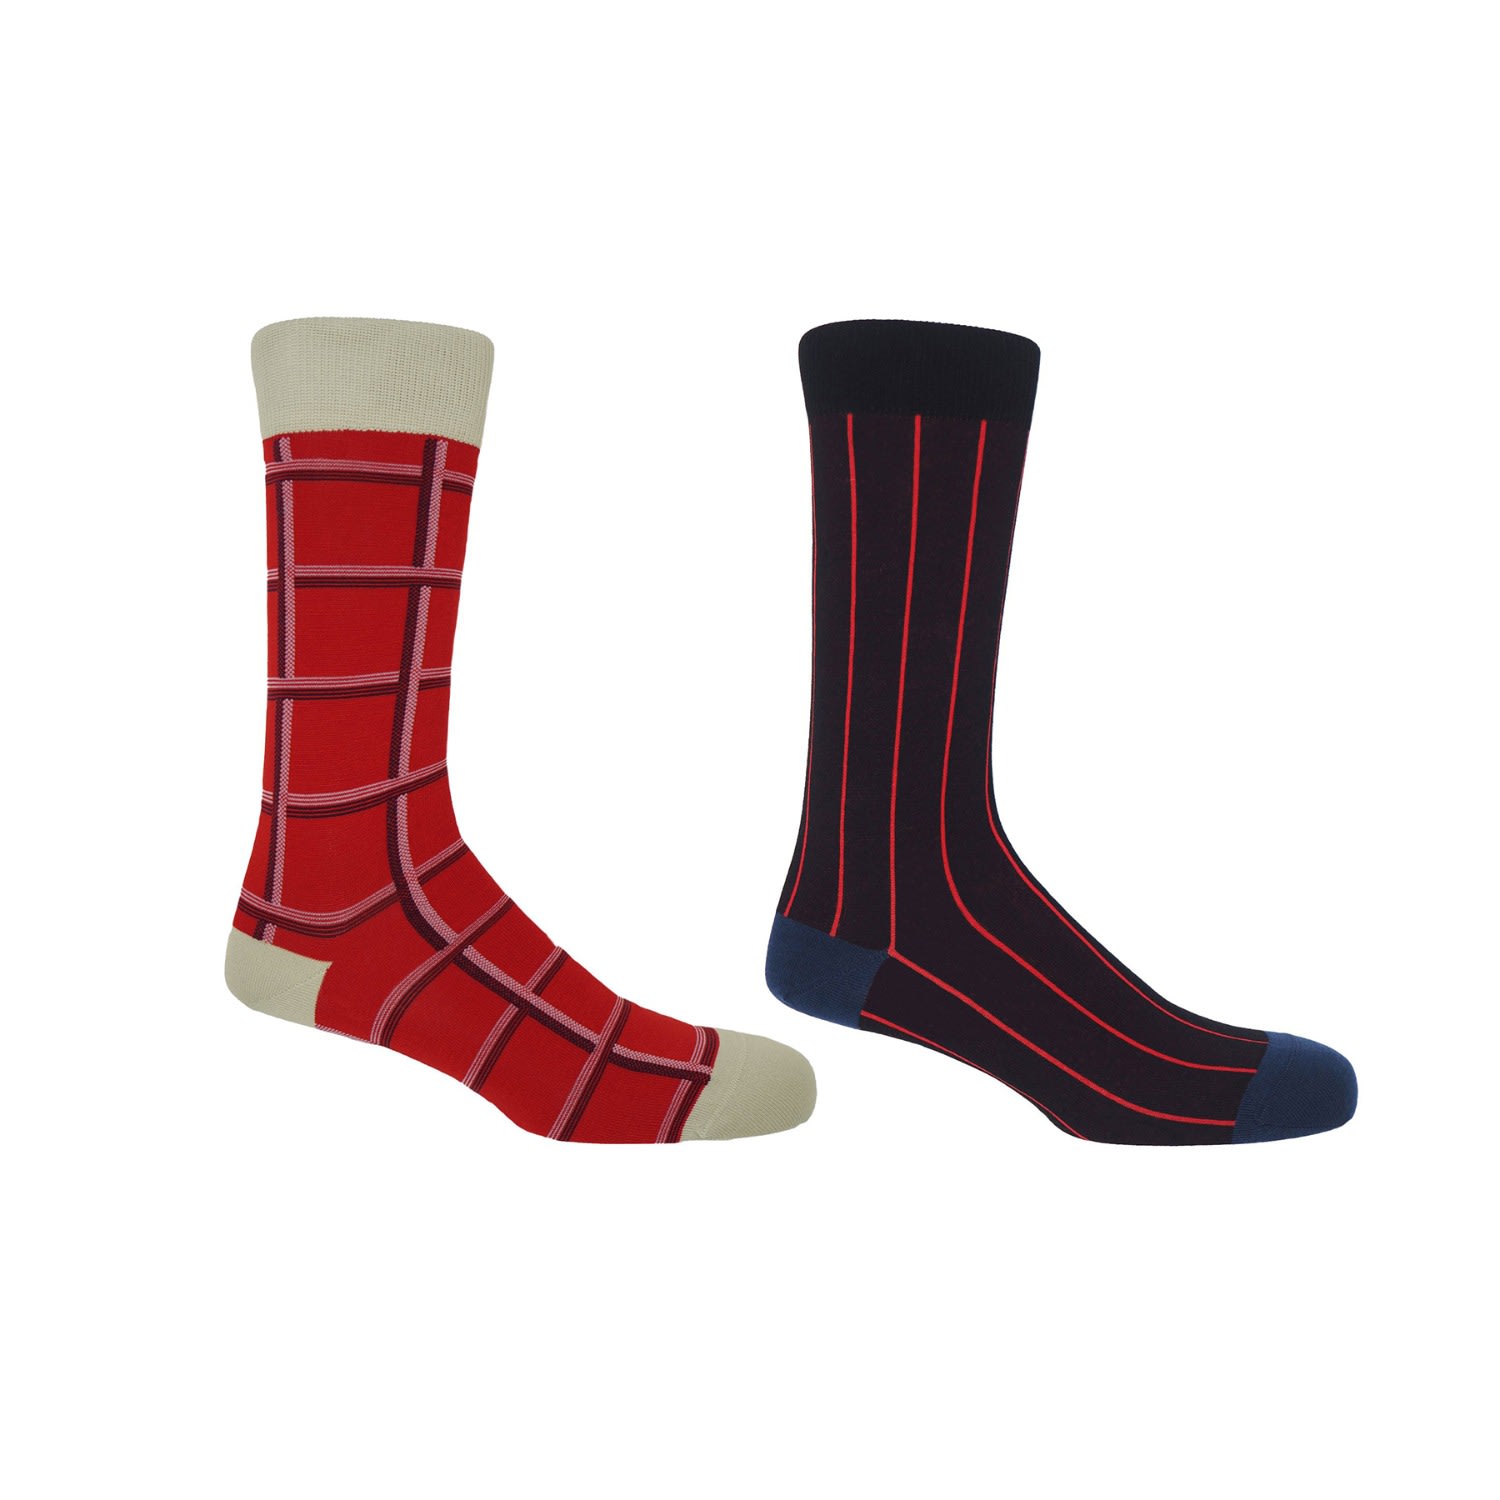 Black / Red Red Check & Black Pin Stripe Men’s Socks 2 Pack One Size Peper Harow - Made in England